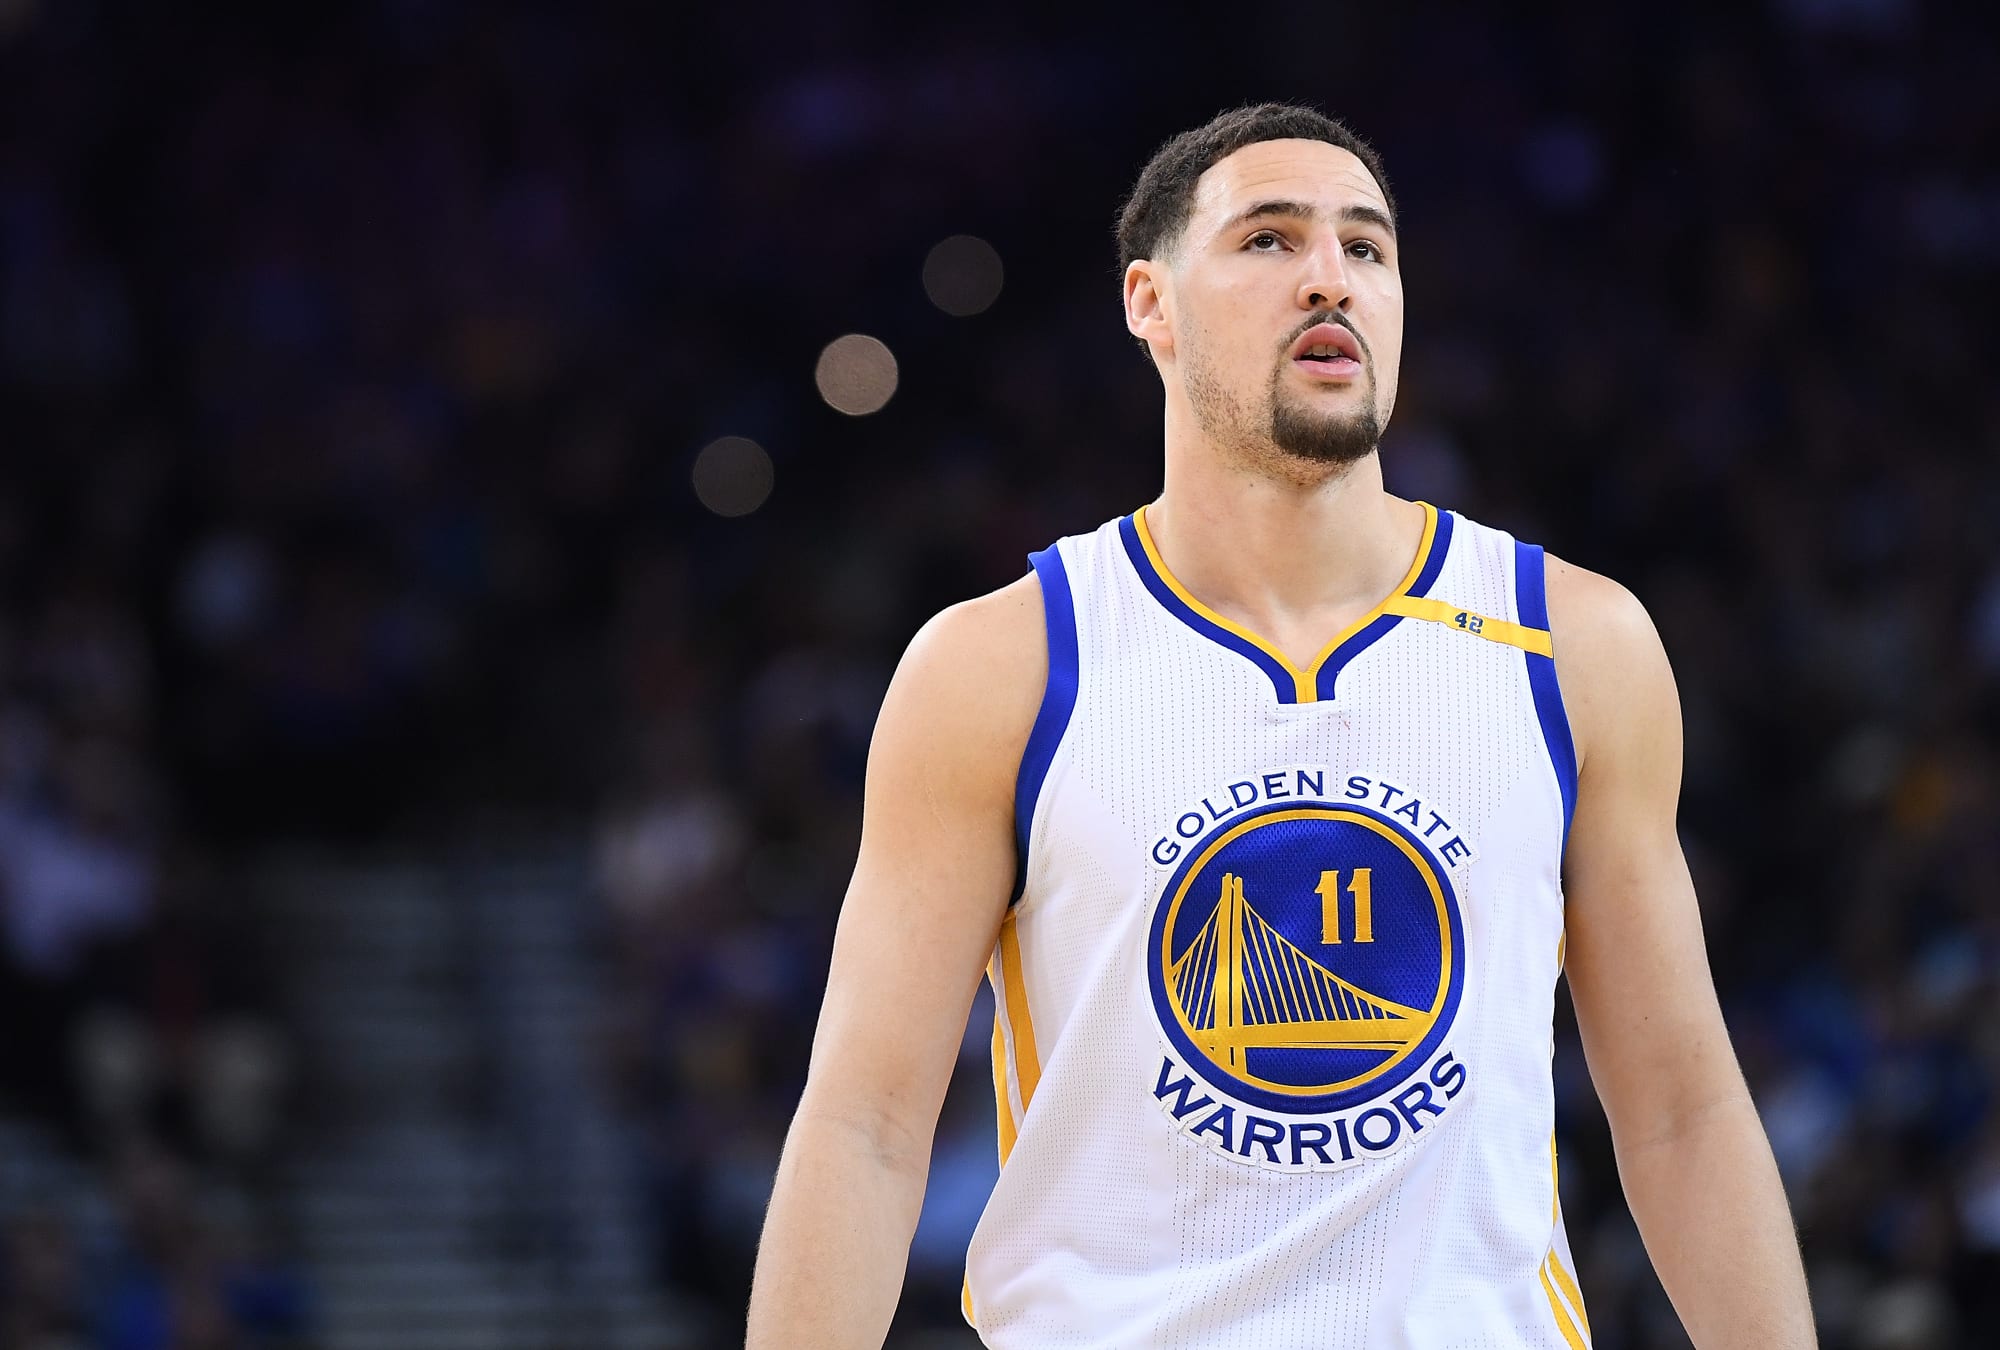 j.j.-redick-klay-thompson-nba-los-angeles-clippers-golden-state